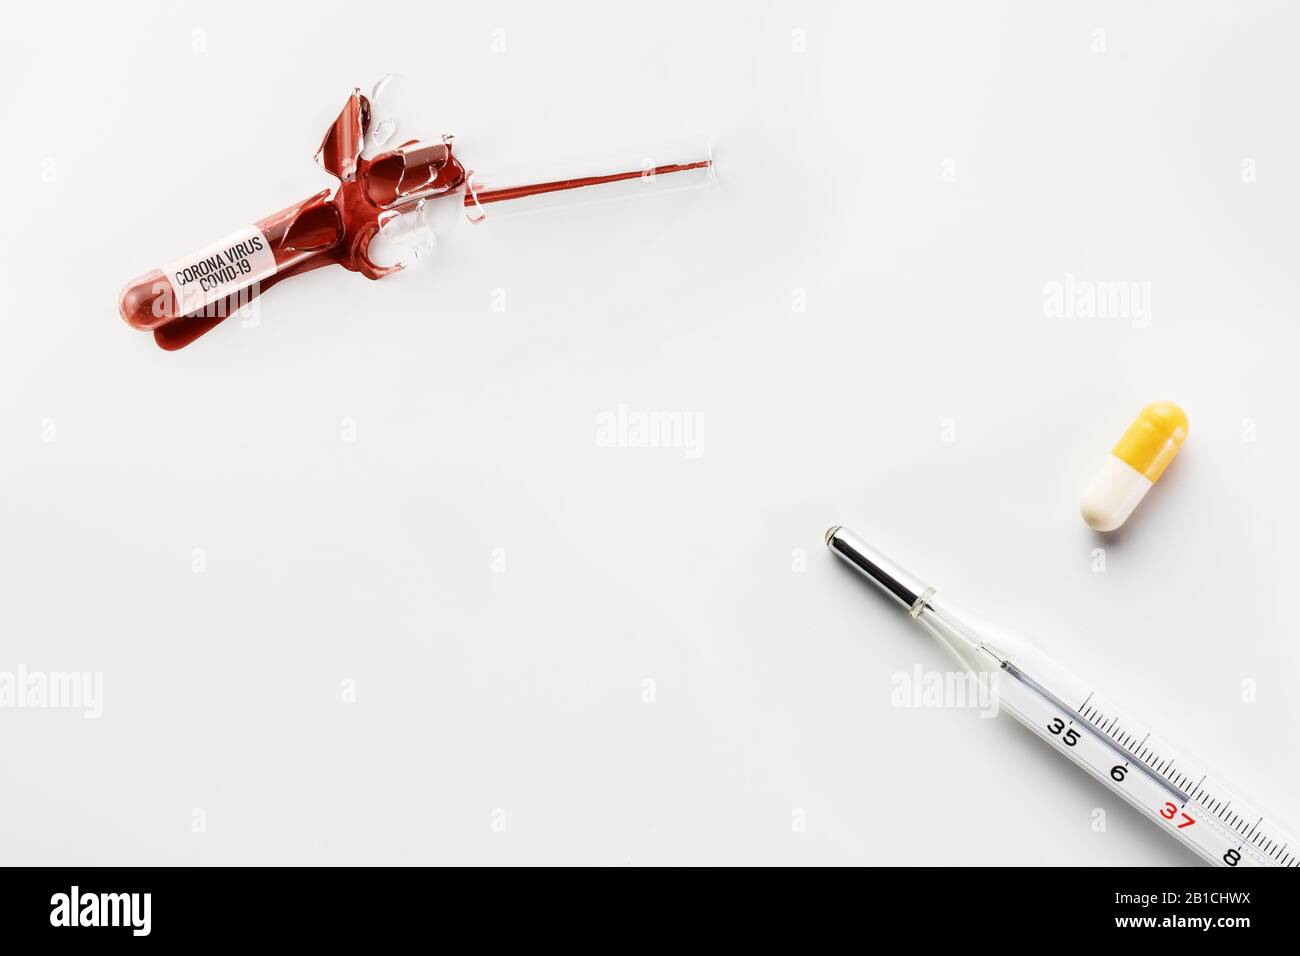 Corona virus infected blood spilled from broken glass test tube, thermometer and pill on white. Corona virus, COVID-19, pandemic and medicine concepts Stock Photo